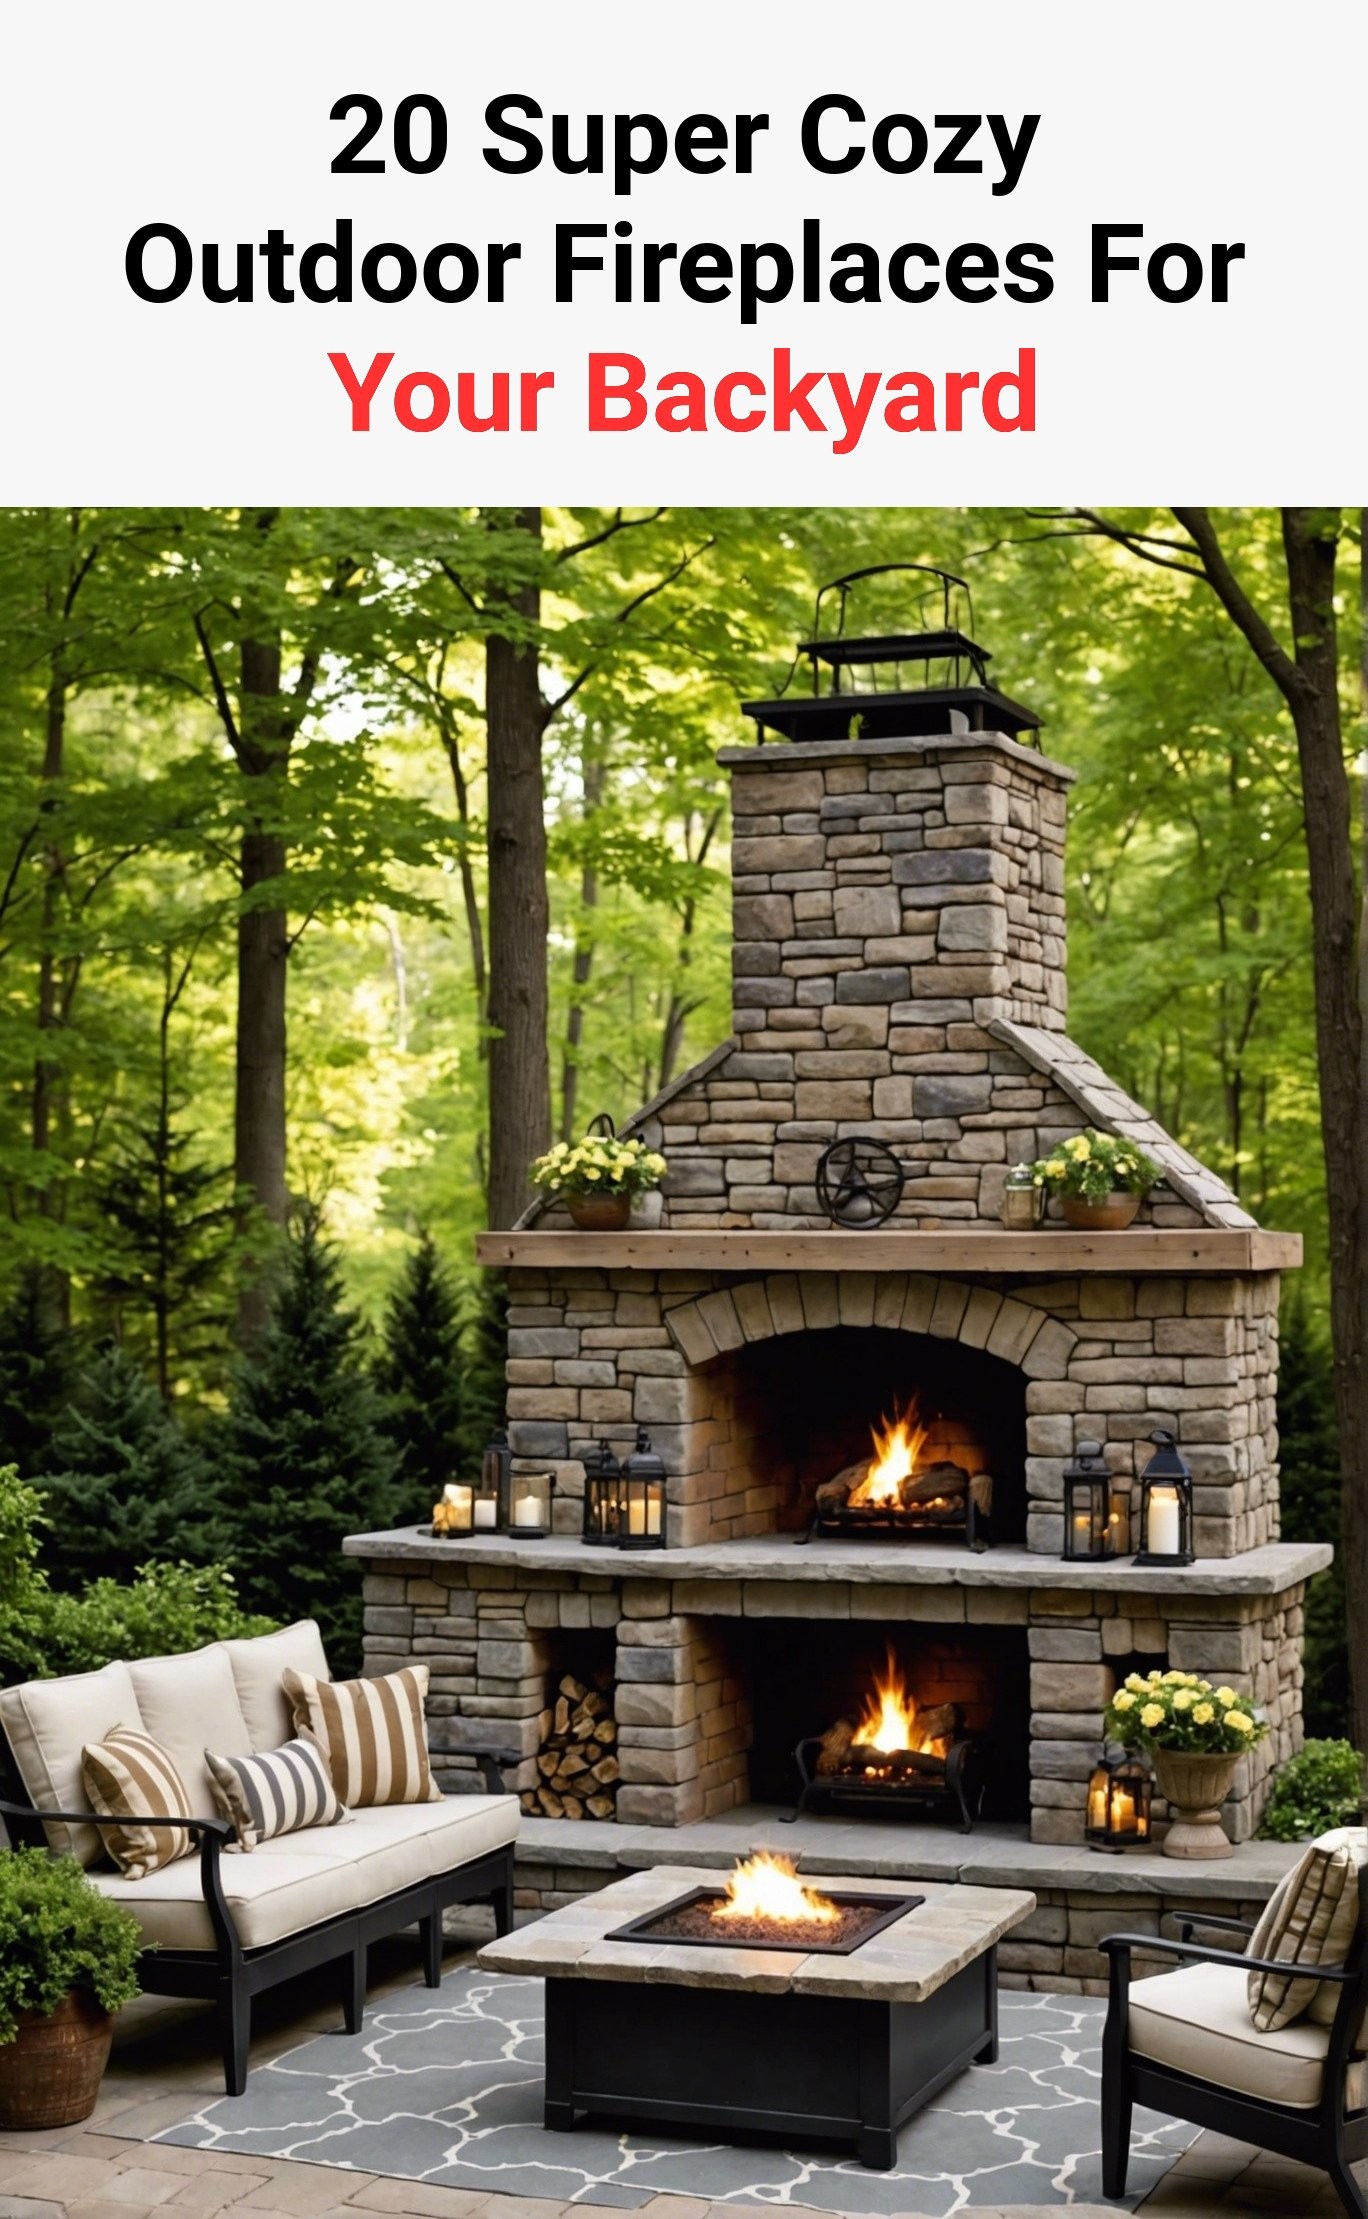 20 Super Cozy Outdoor Fireplaces For Your Backyard